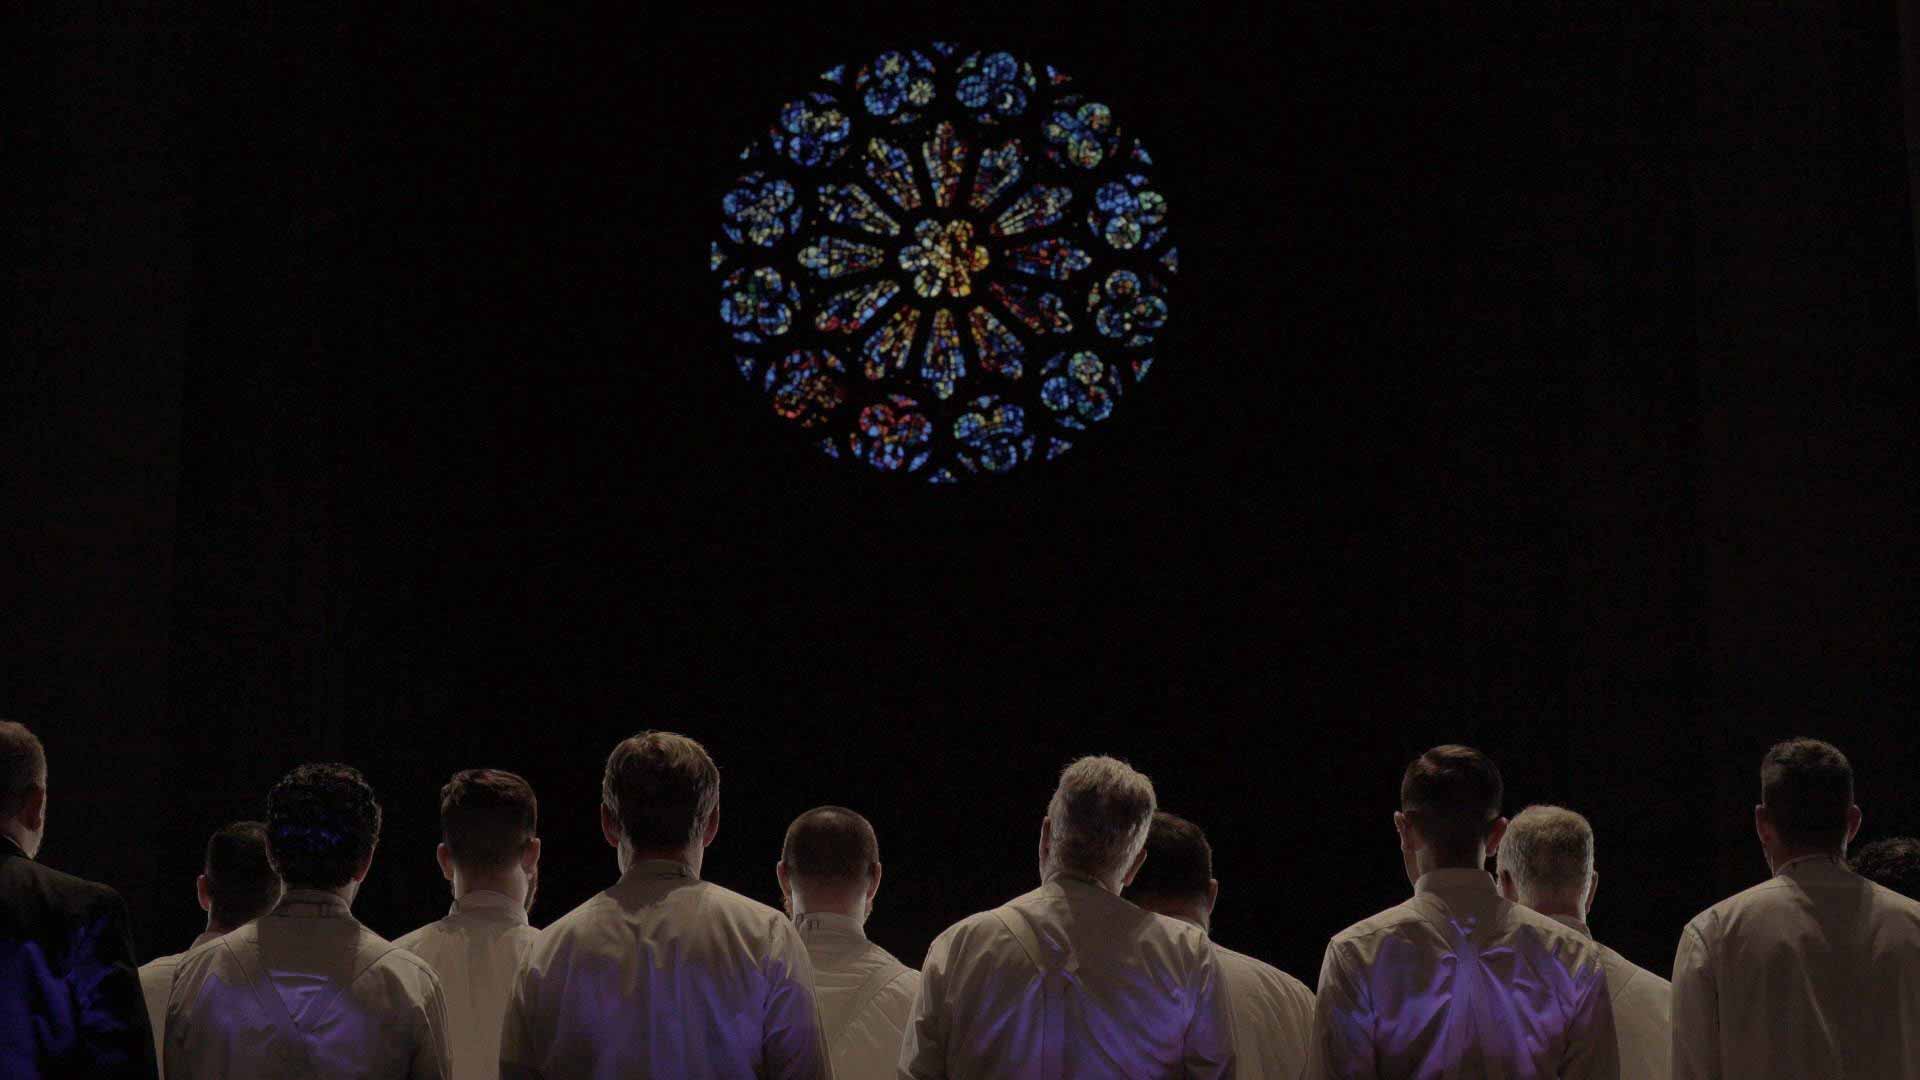 To confront a resurgence of anti-LGBTQ laws, the San Francisco Gay Men’s Chorus embarks on an unprecedented bus tour in the Deep South, celebrat...